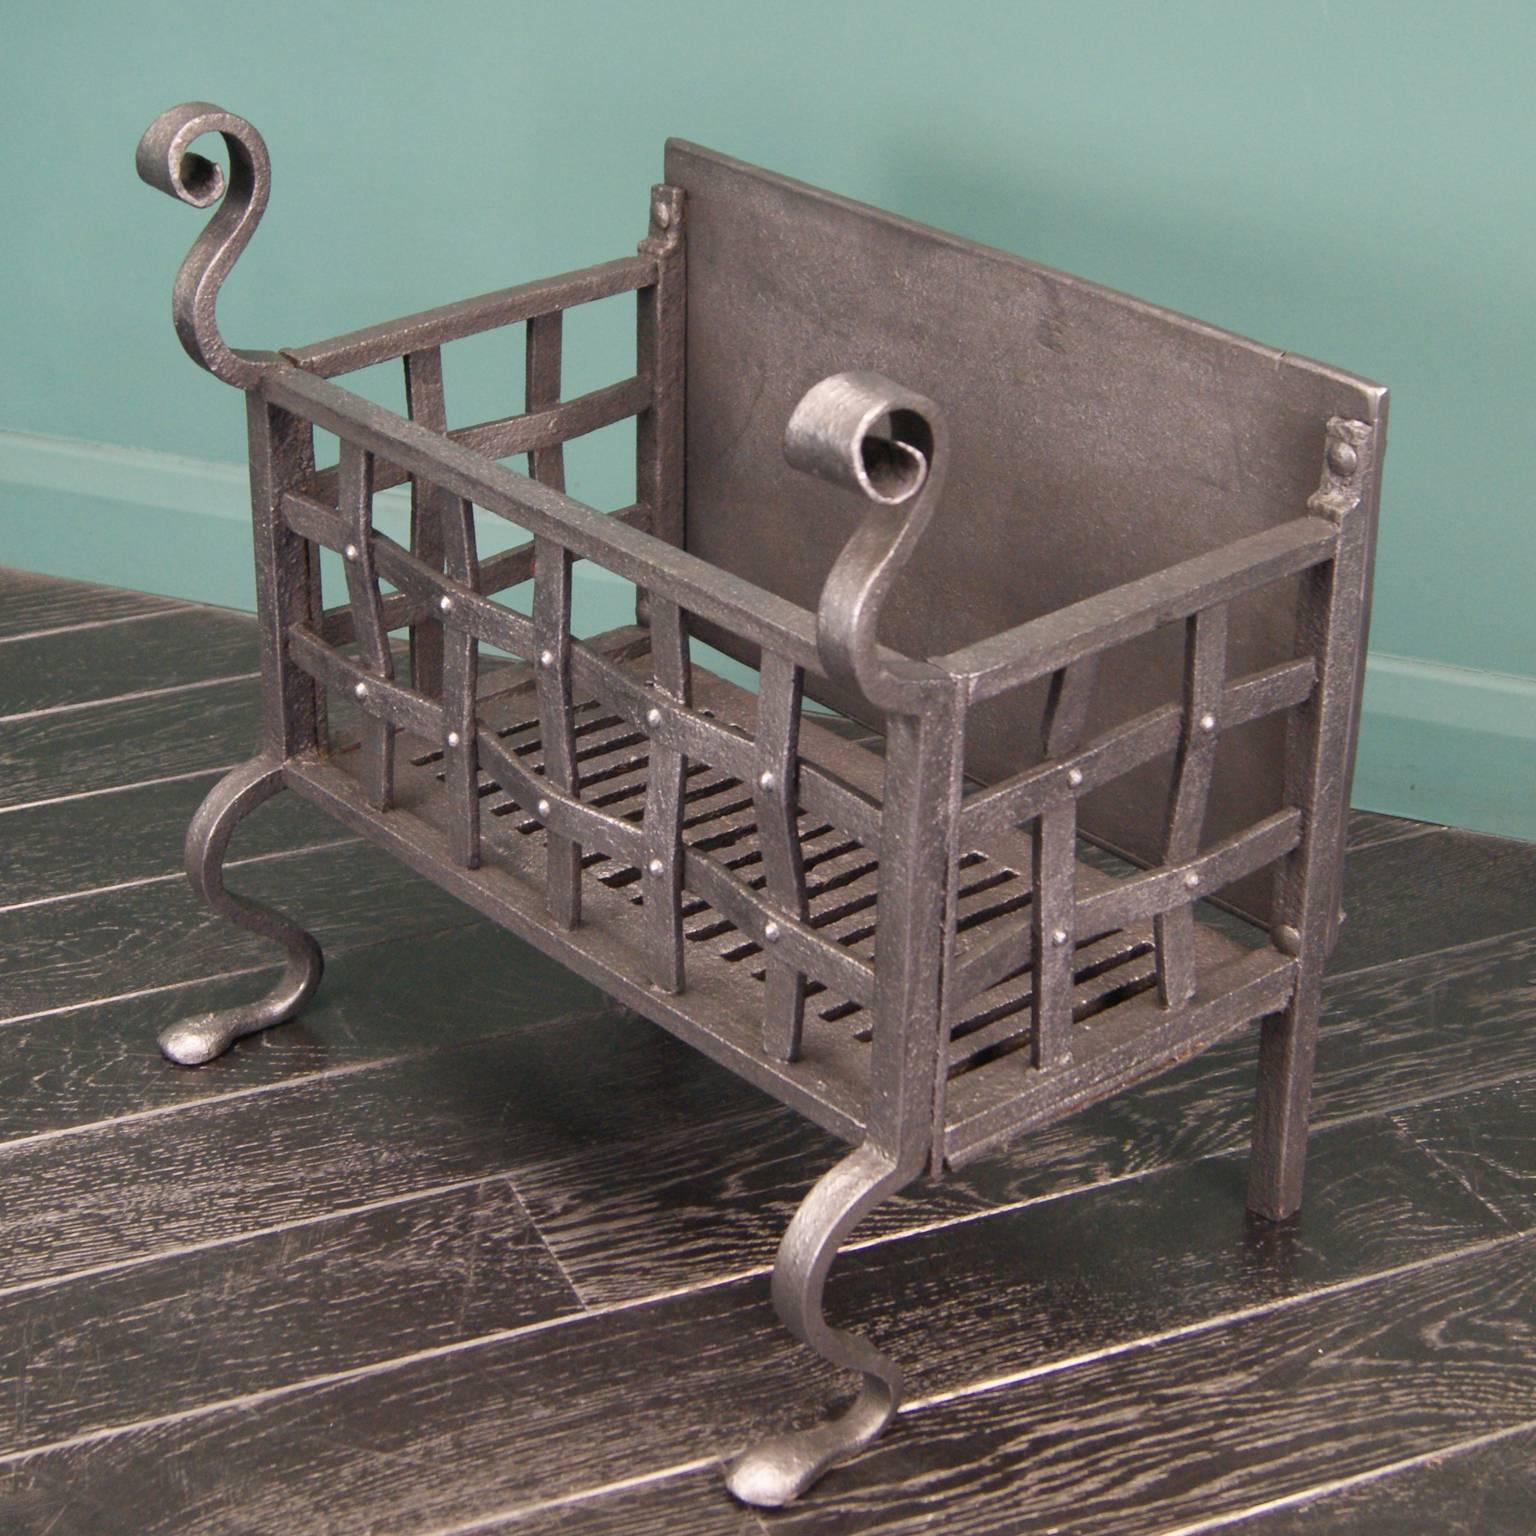 Wrought iron fire basket with shaped legs, scroll finials and rivet-work front,

circa 1890.